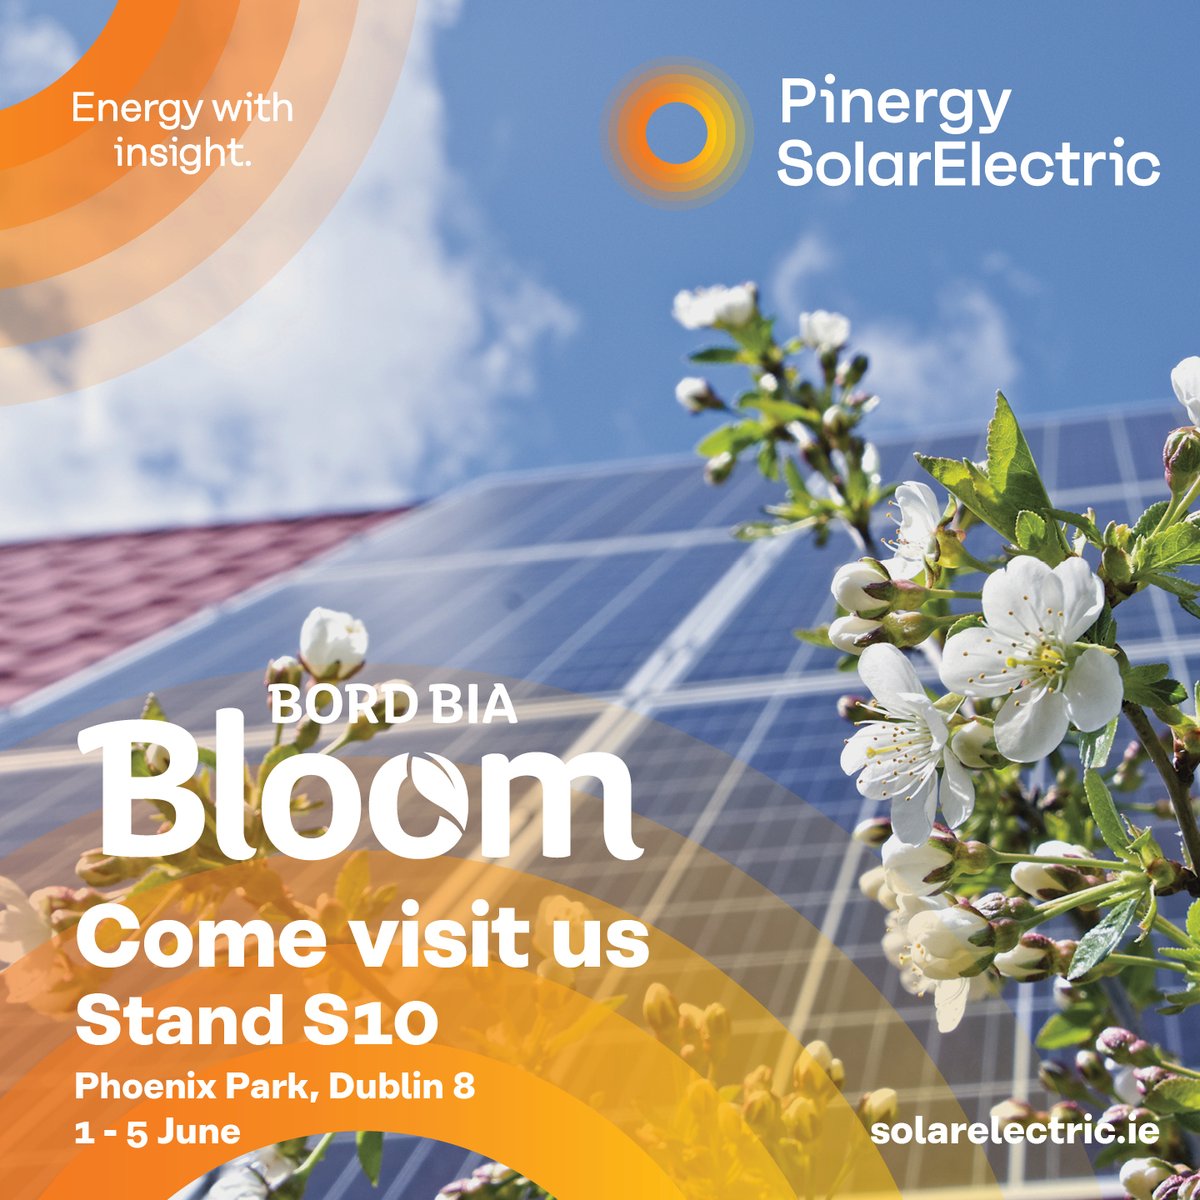 Visiting @BordBiaBloom this Bank Holiday Weekend? Pop by our stand S10 & chat to our energy experts about how to start your sustainable energy future.

There’s never been a better time to make the switch to Solar - solarelectric.ie
 
#BordBiaBloom
#EnergyWithInsight